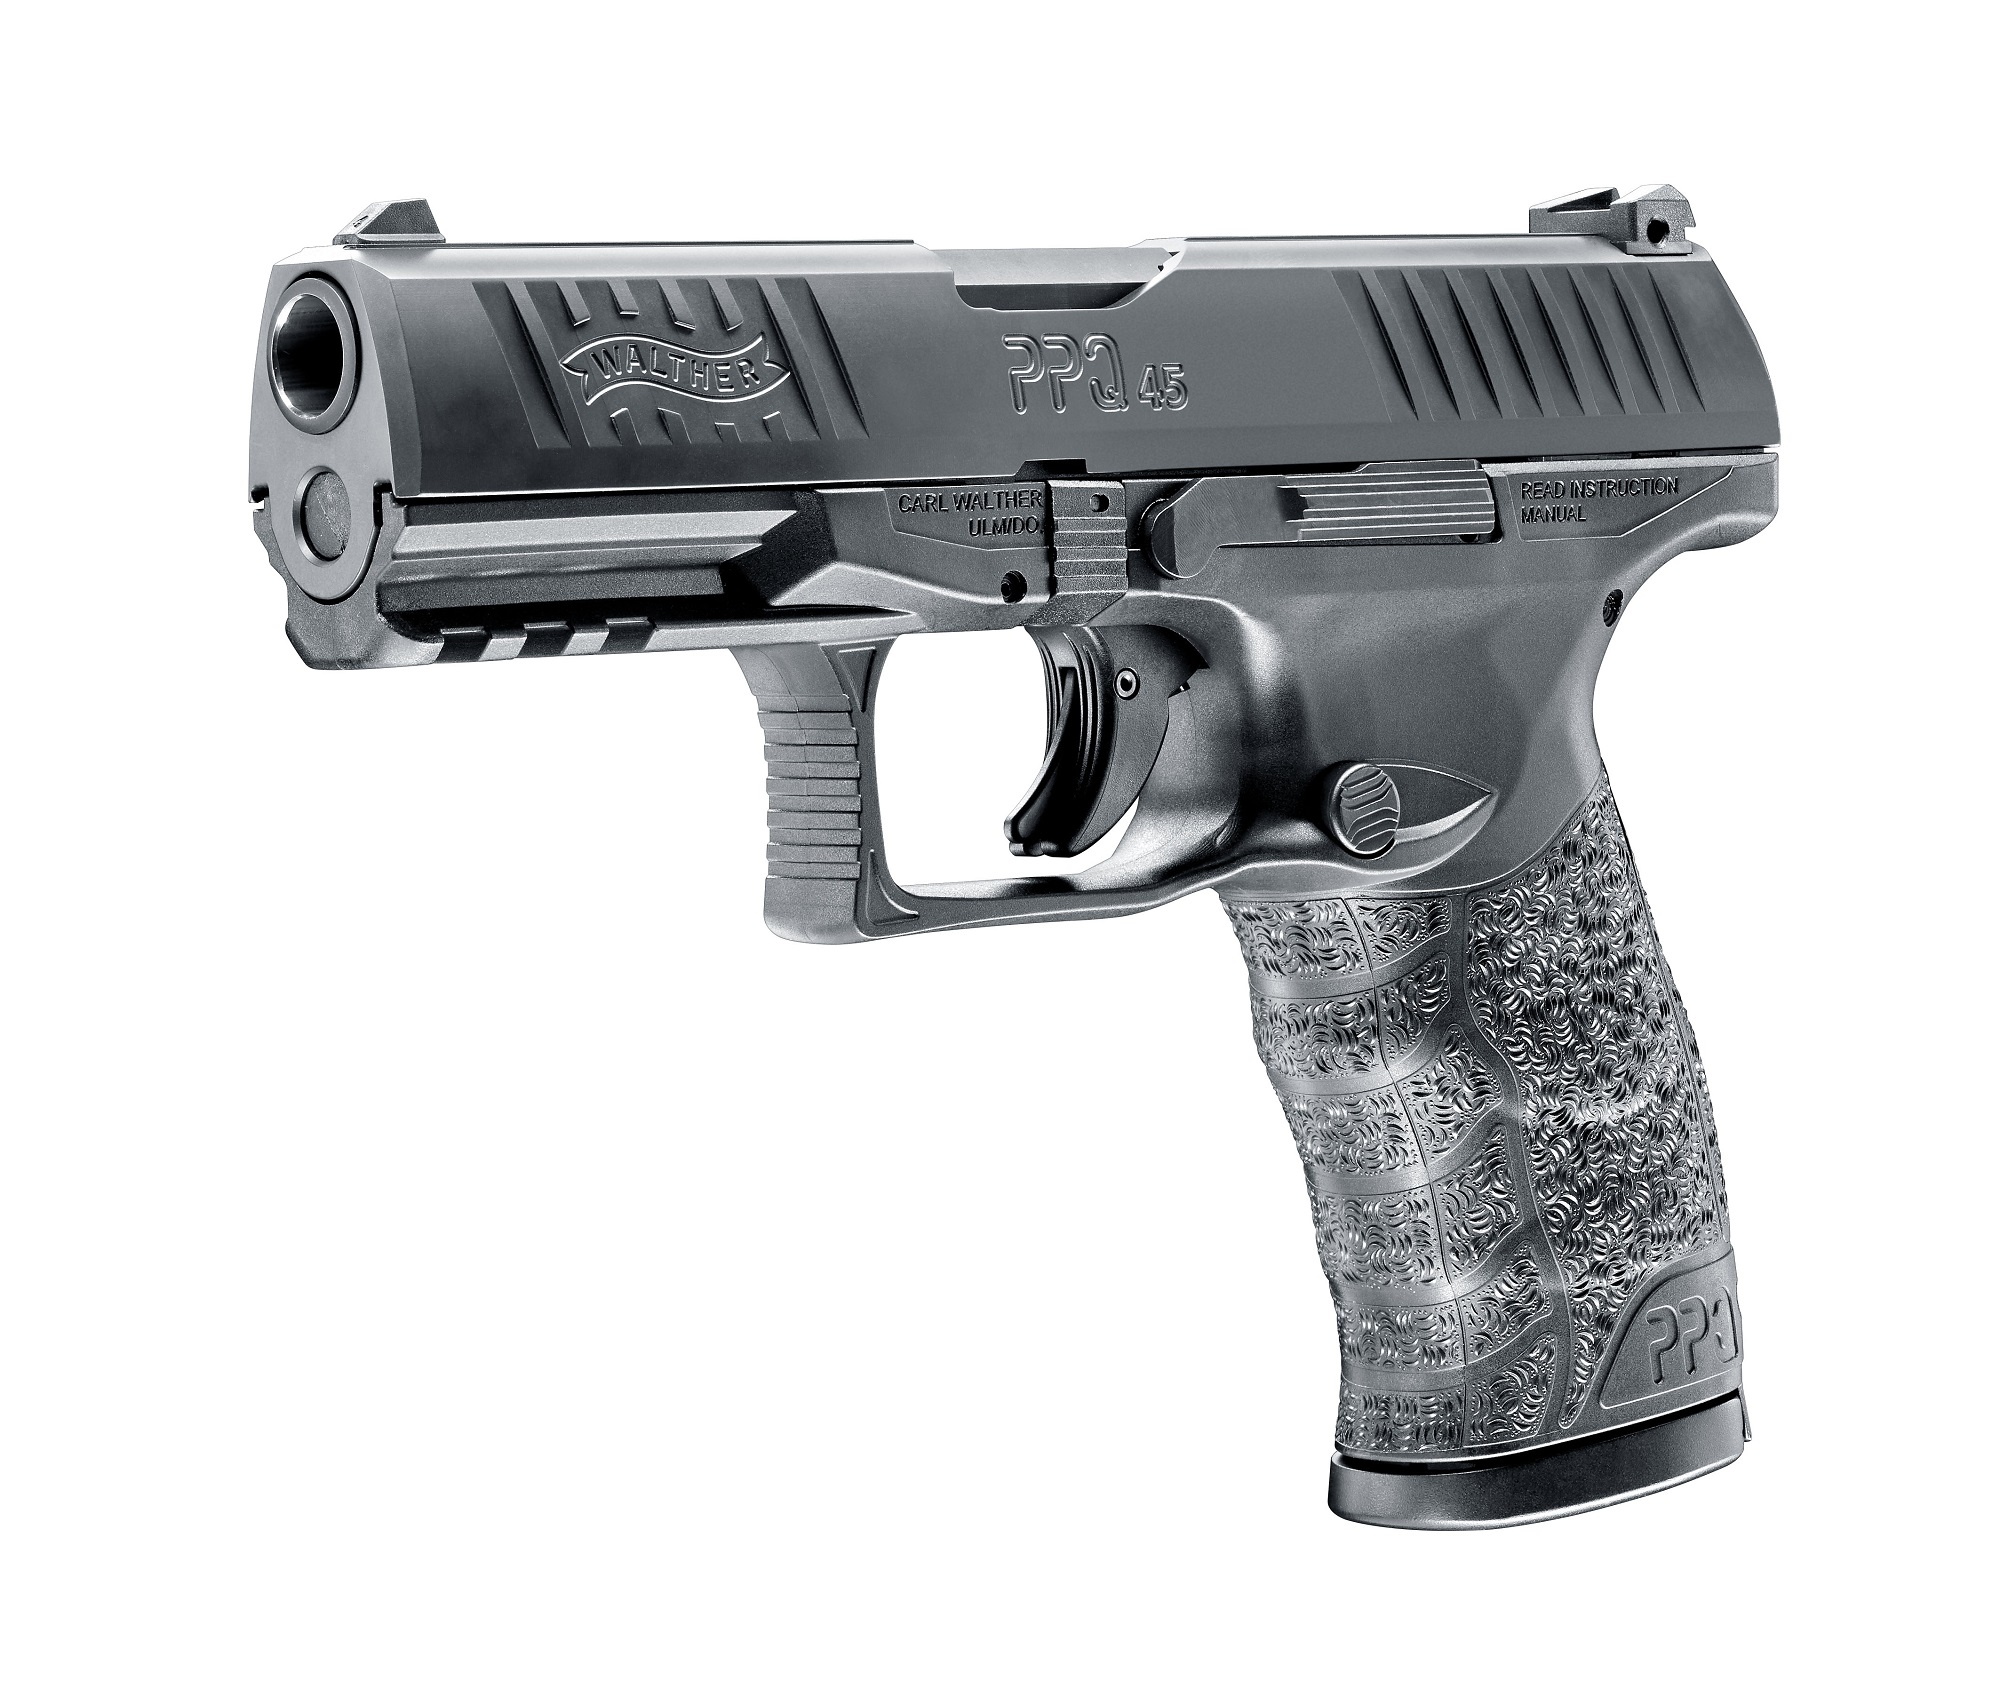 Walther Ppq 45 - Walther - All4shooters.com